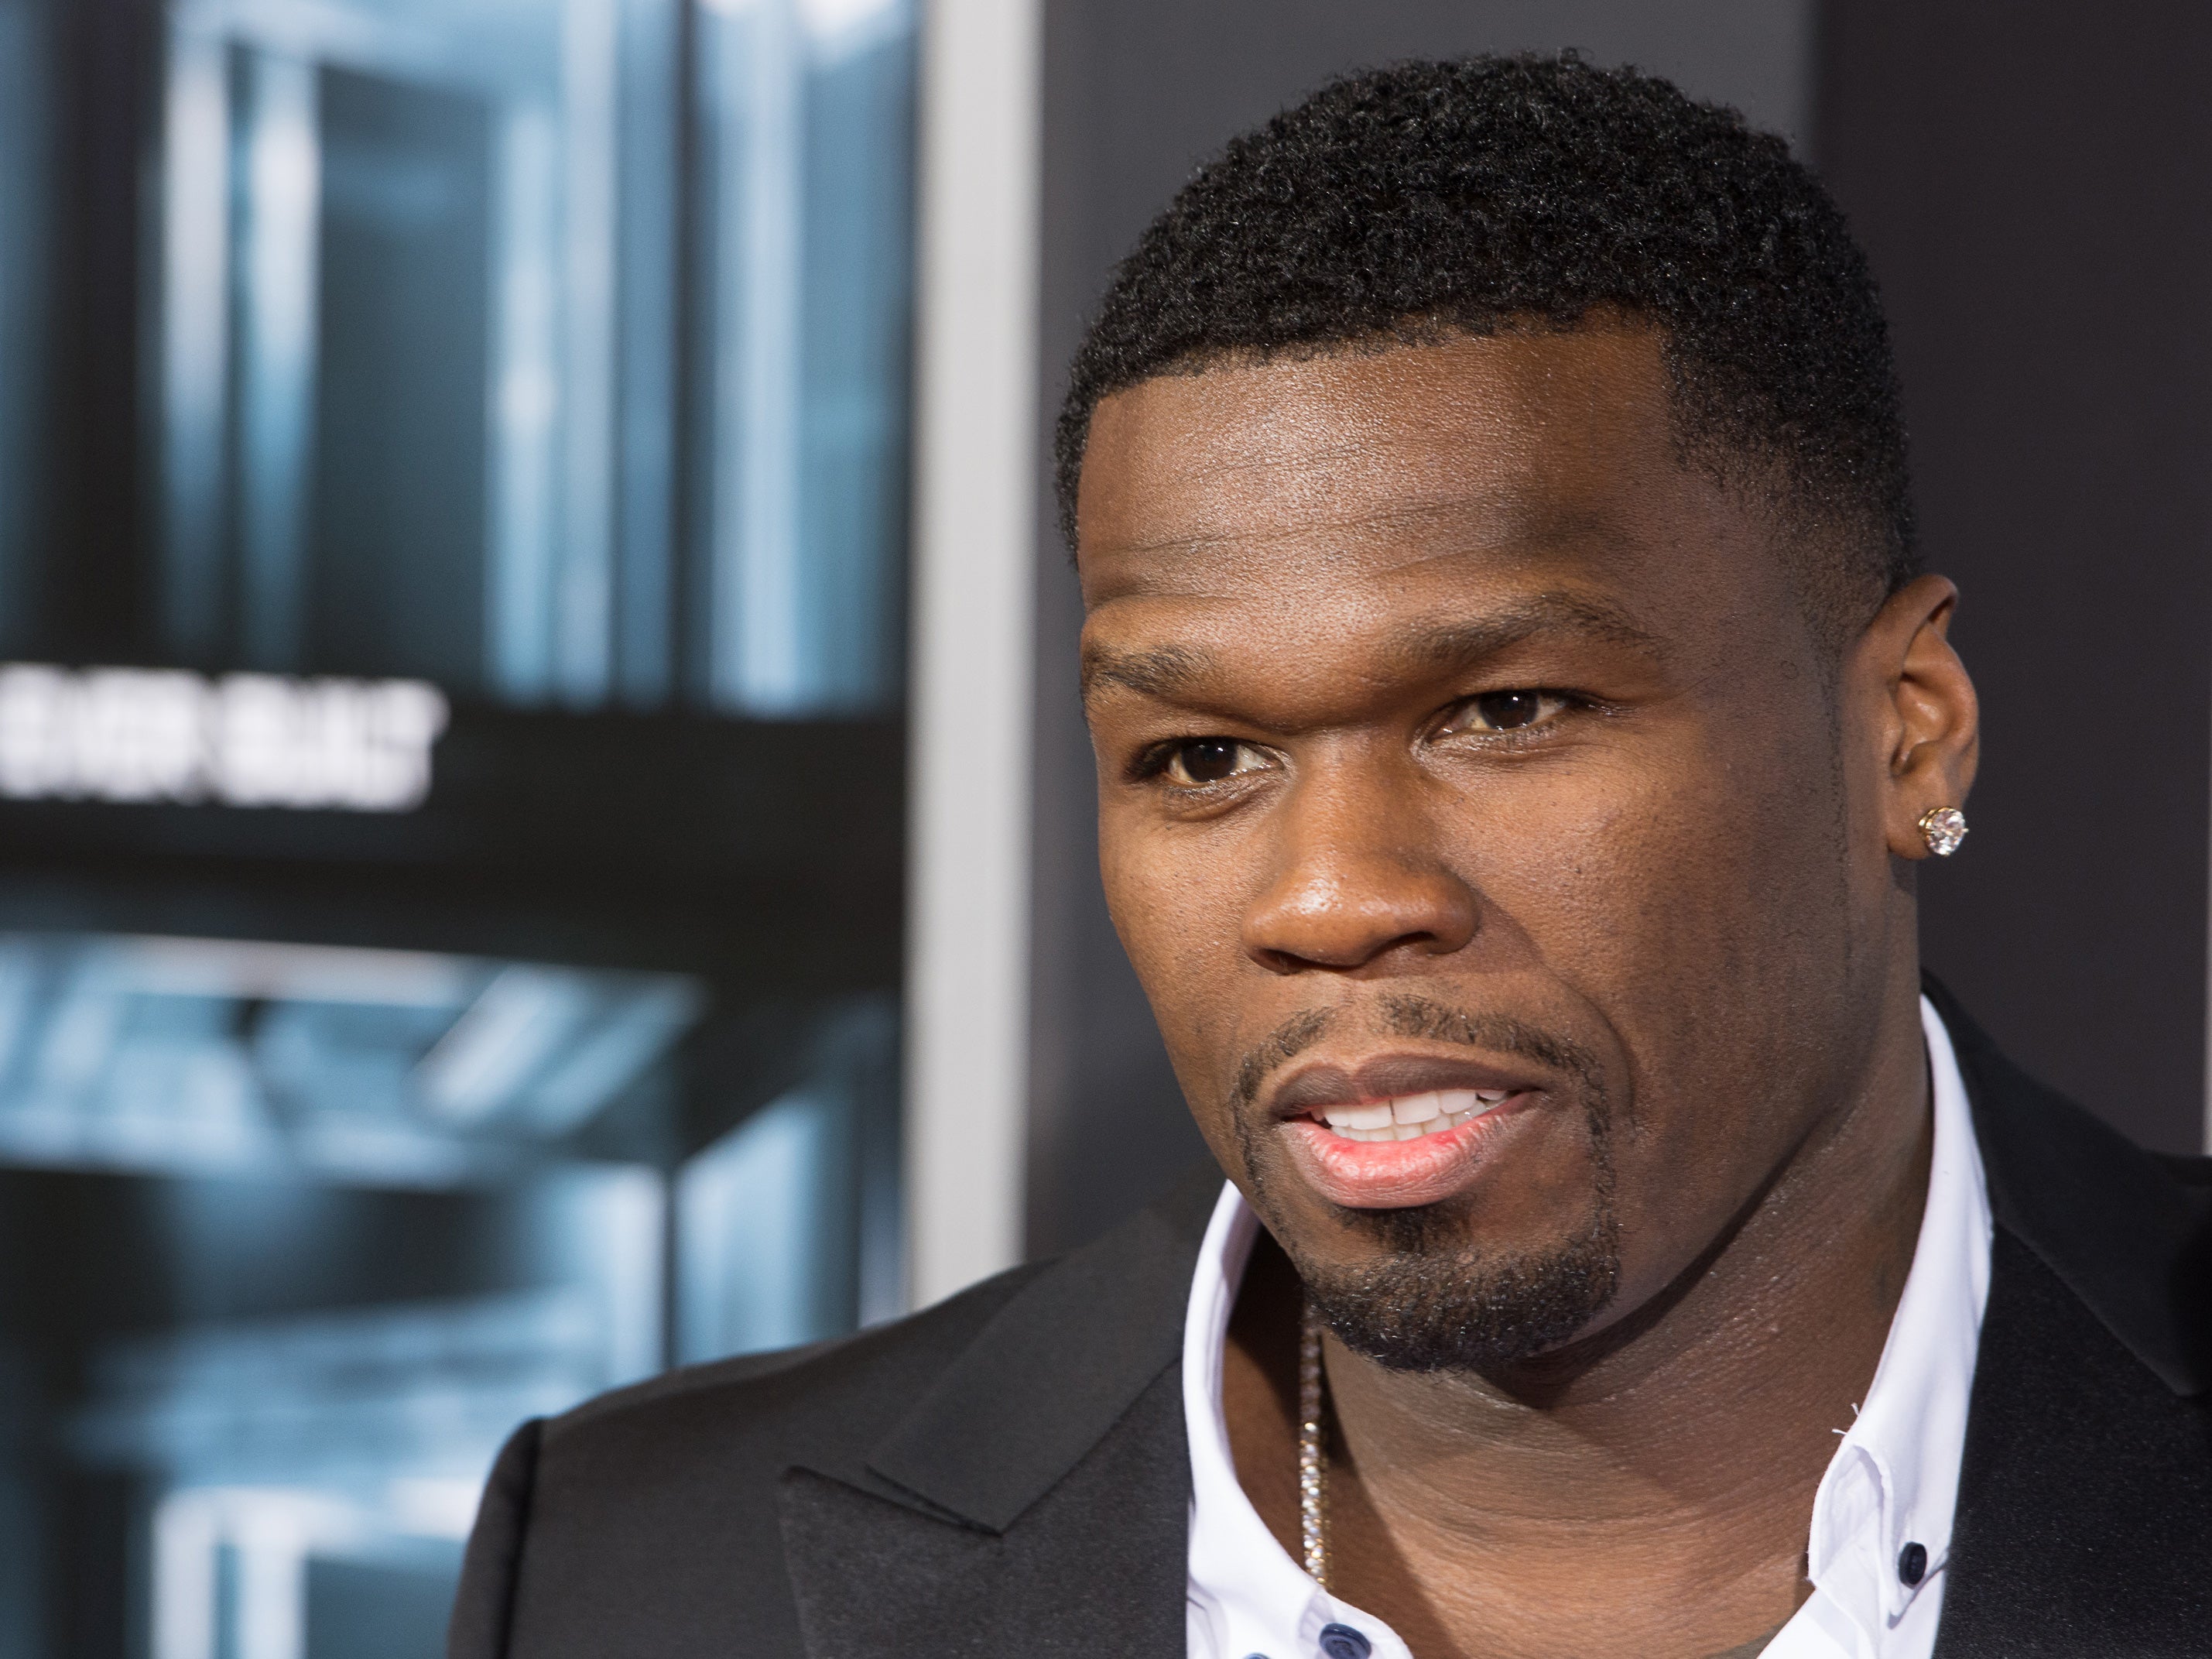 50 Cent Ordered To Pay 5 Million For Adding Audio Commentary To 